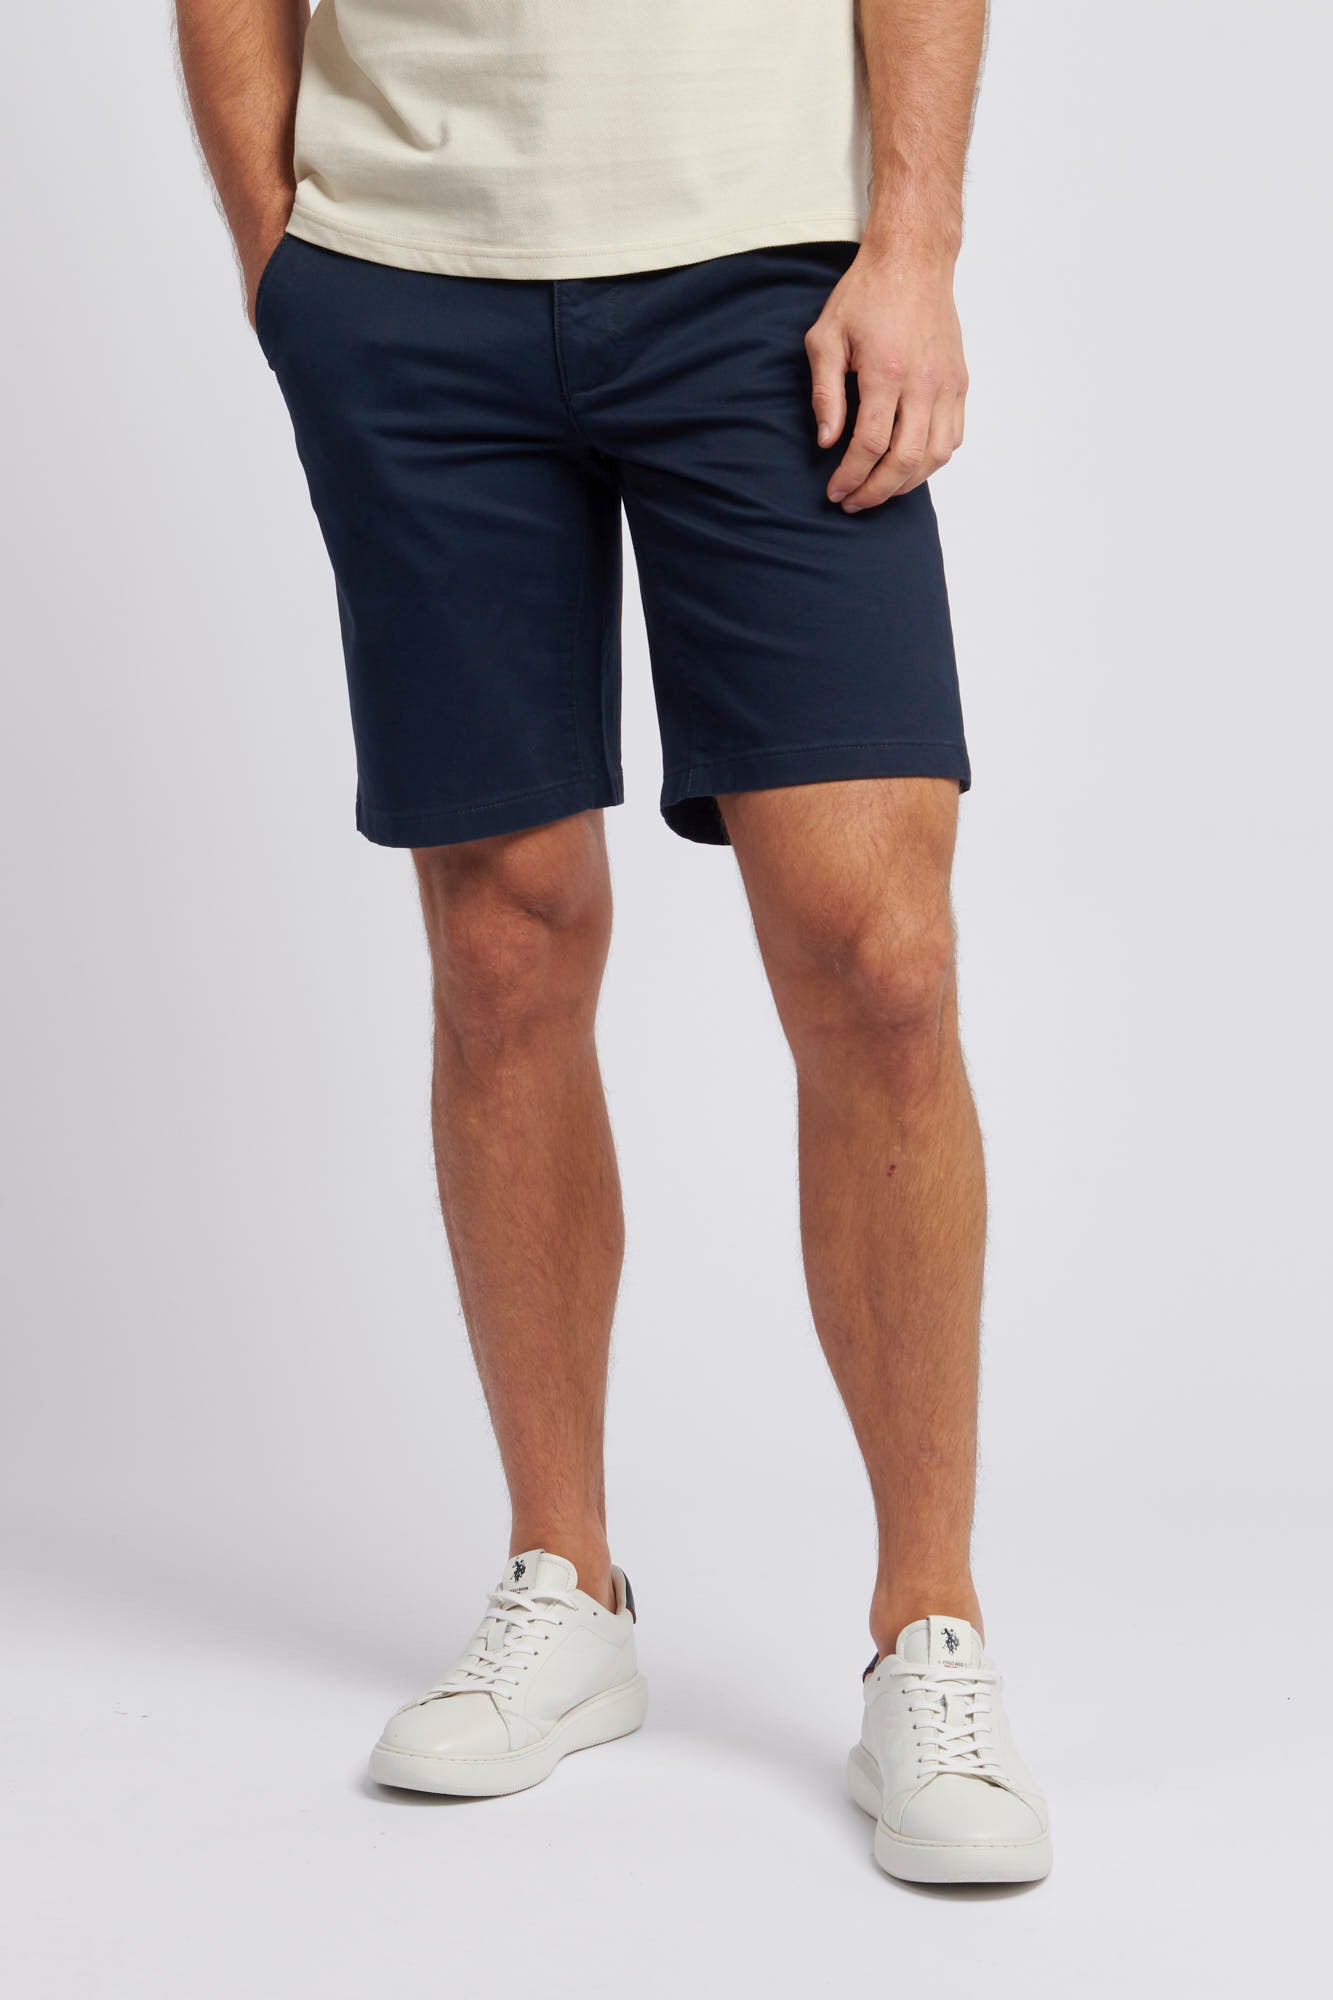 U.S. Polo Assn. Mens Classic Chinos Shorts in Dark Sapphire Navy / Haute Red DHM